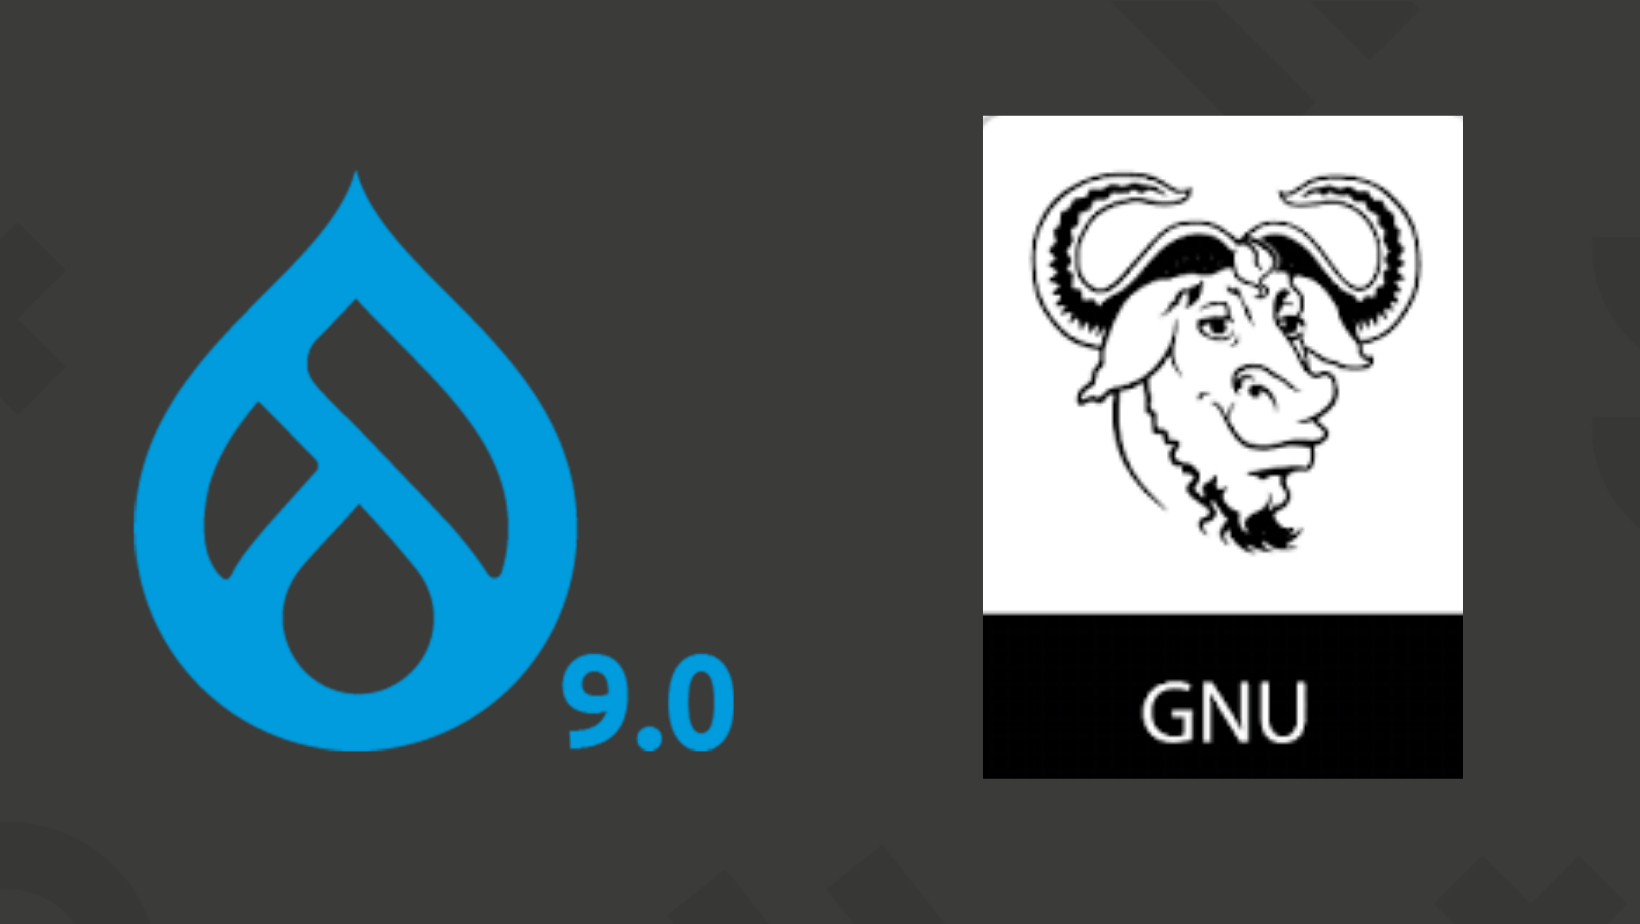 The logo of Drupal 9 and GNU GPL can be seen on a dark background.